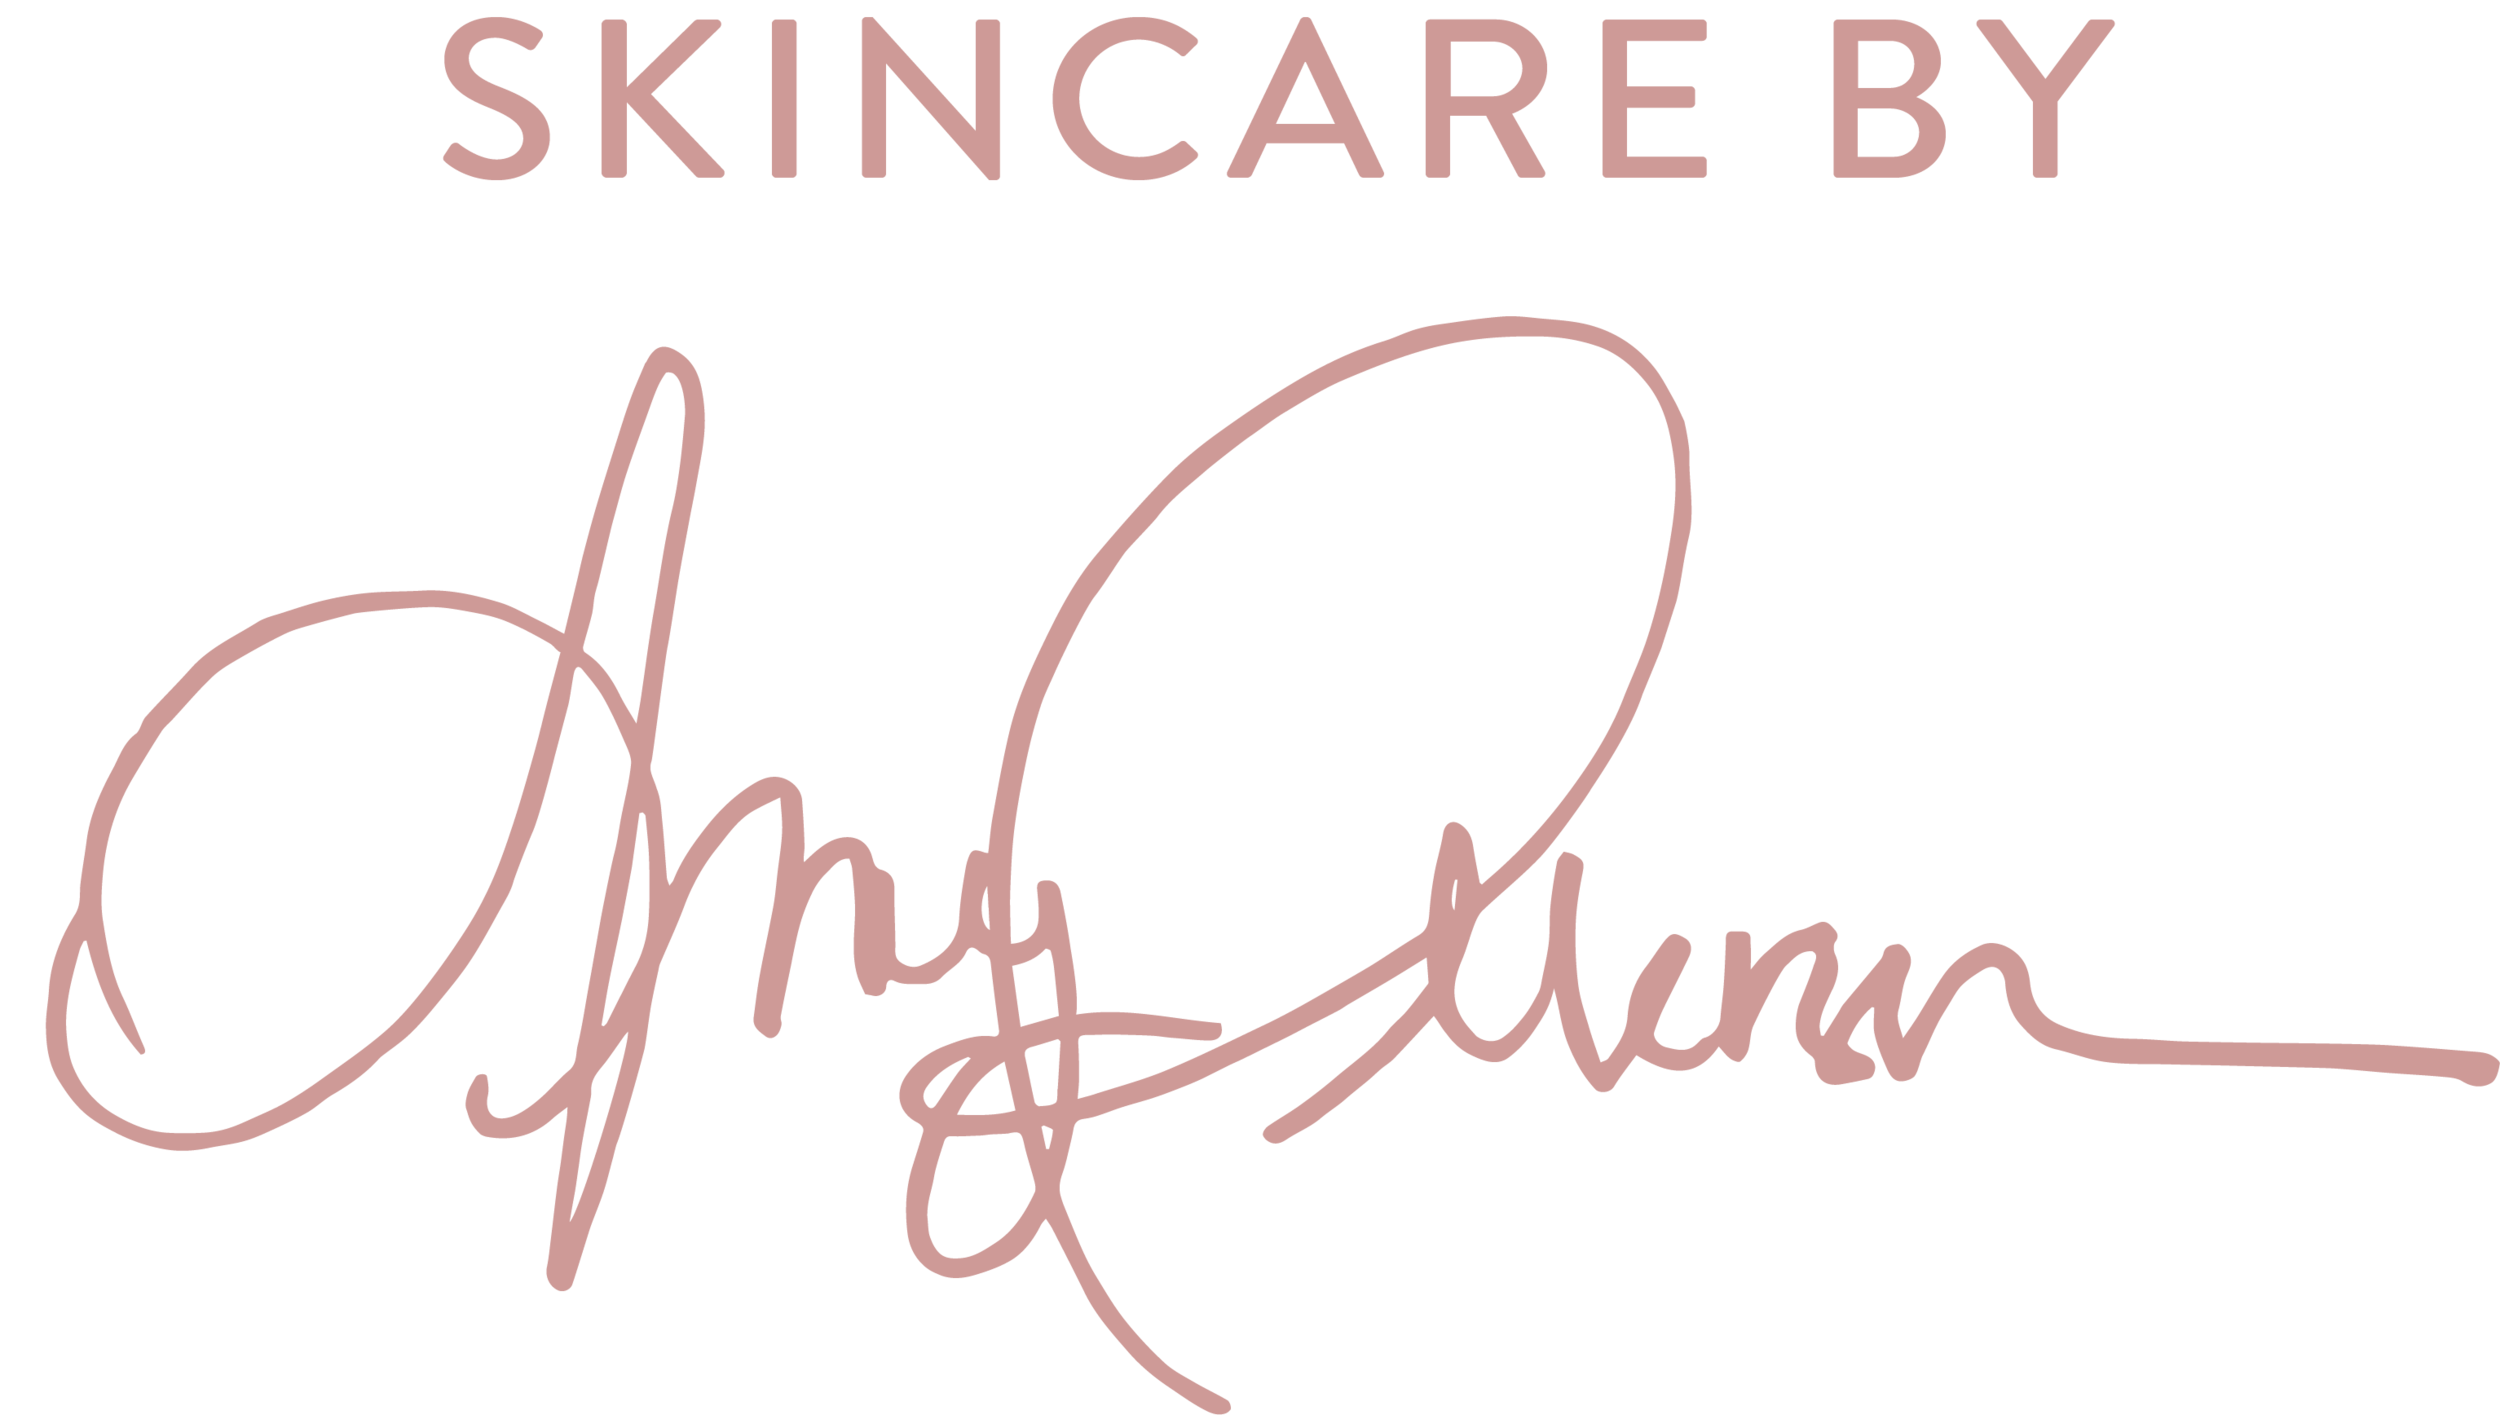 Skincare by Amy Peterson